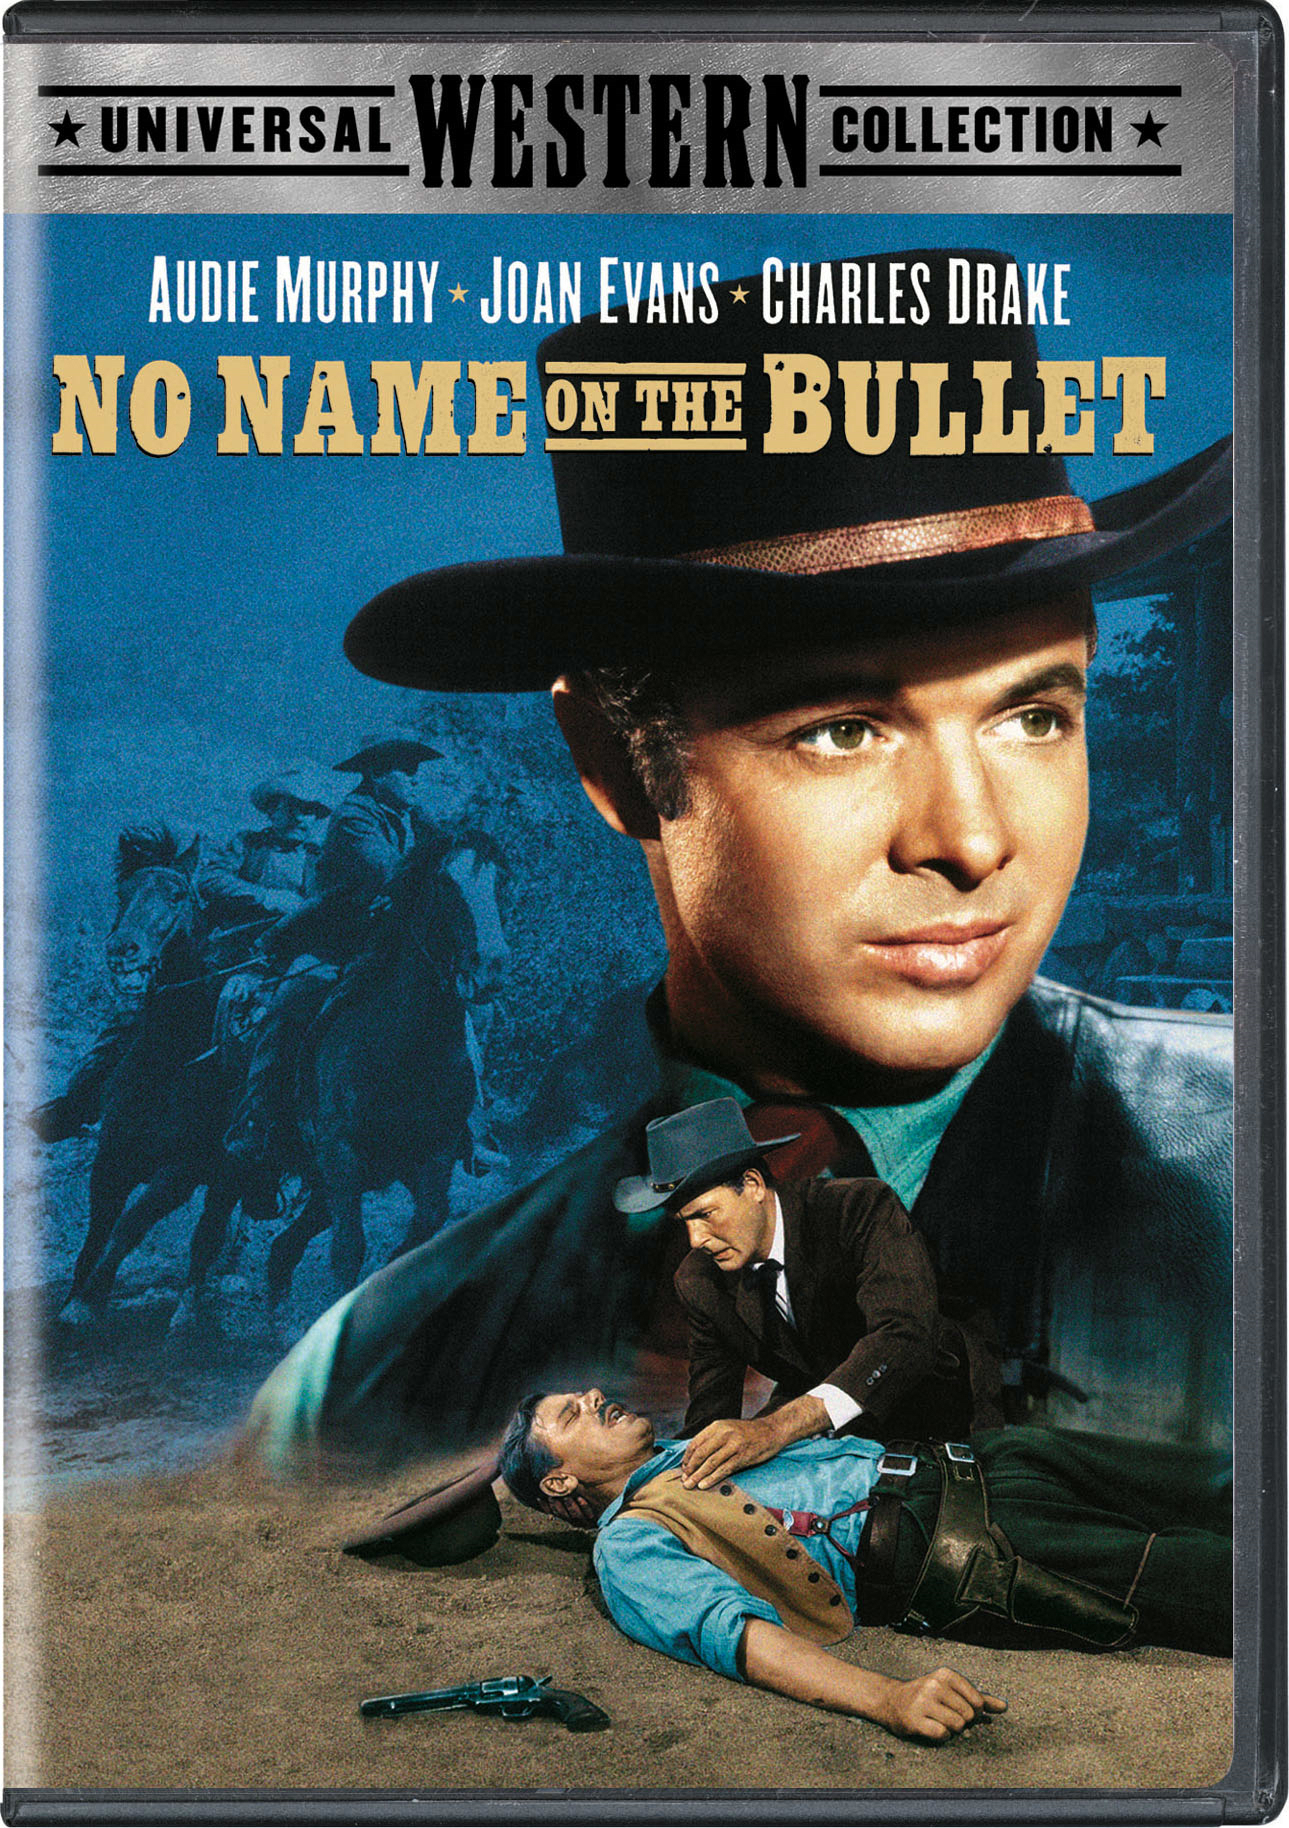 No Name On The Bullet - DVD [ 1959 ]  - Western Movies On DVD - Movies On GRUV